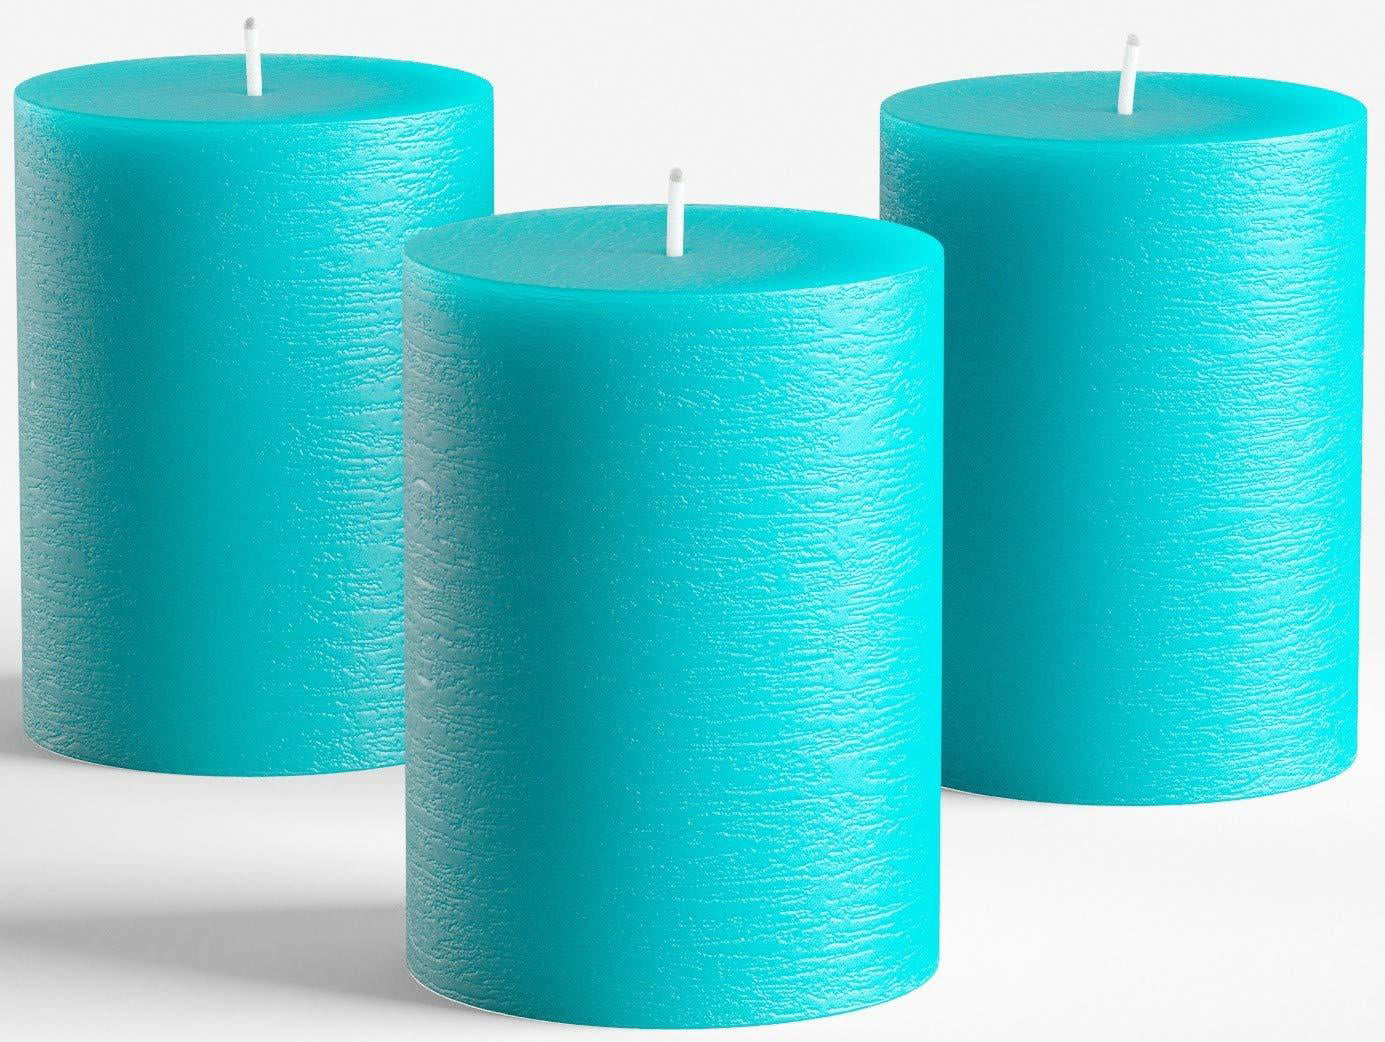 Spa Smokeless Cotton Wick Relaxation Home Decoration Melt Candle Company 3 x 8 Light Blue Pillar Candle Set of 2 Unscented Handpoured for Weddings